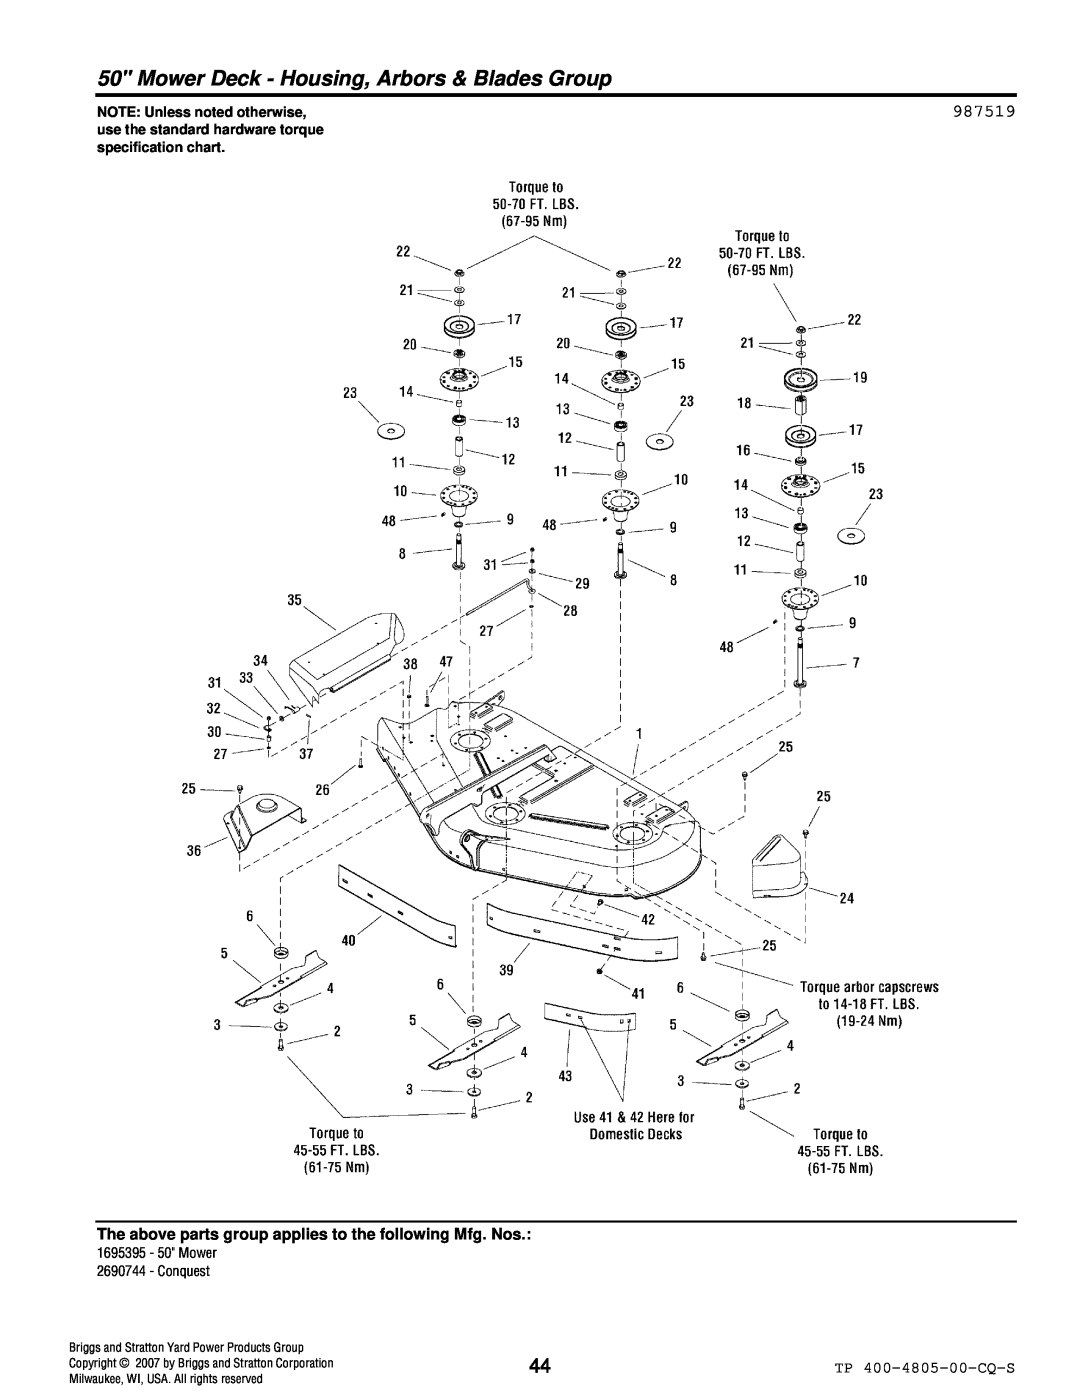 Simplicity 4WD Series manual Mower Deck - Housing, Arbors & Blades Group, 987519, NOTE: Unless noted otherwise 